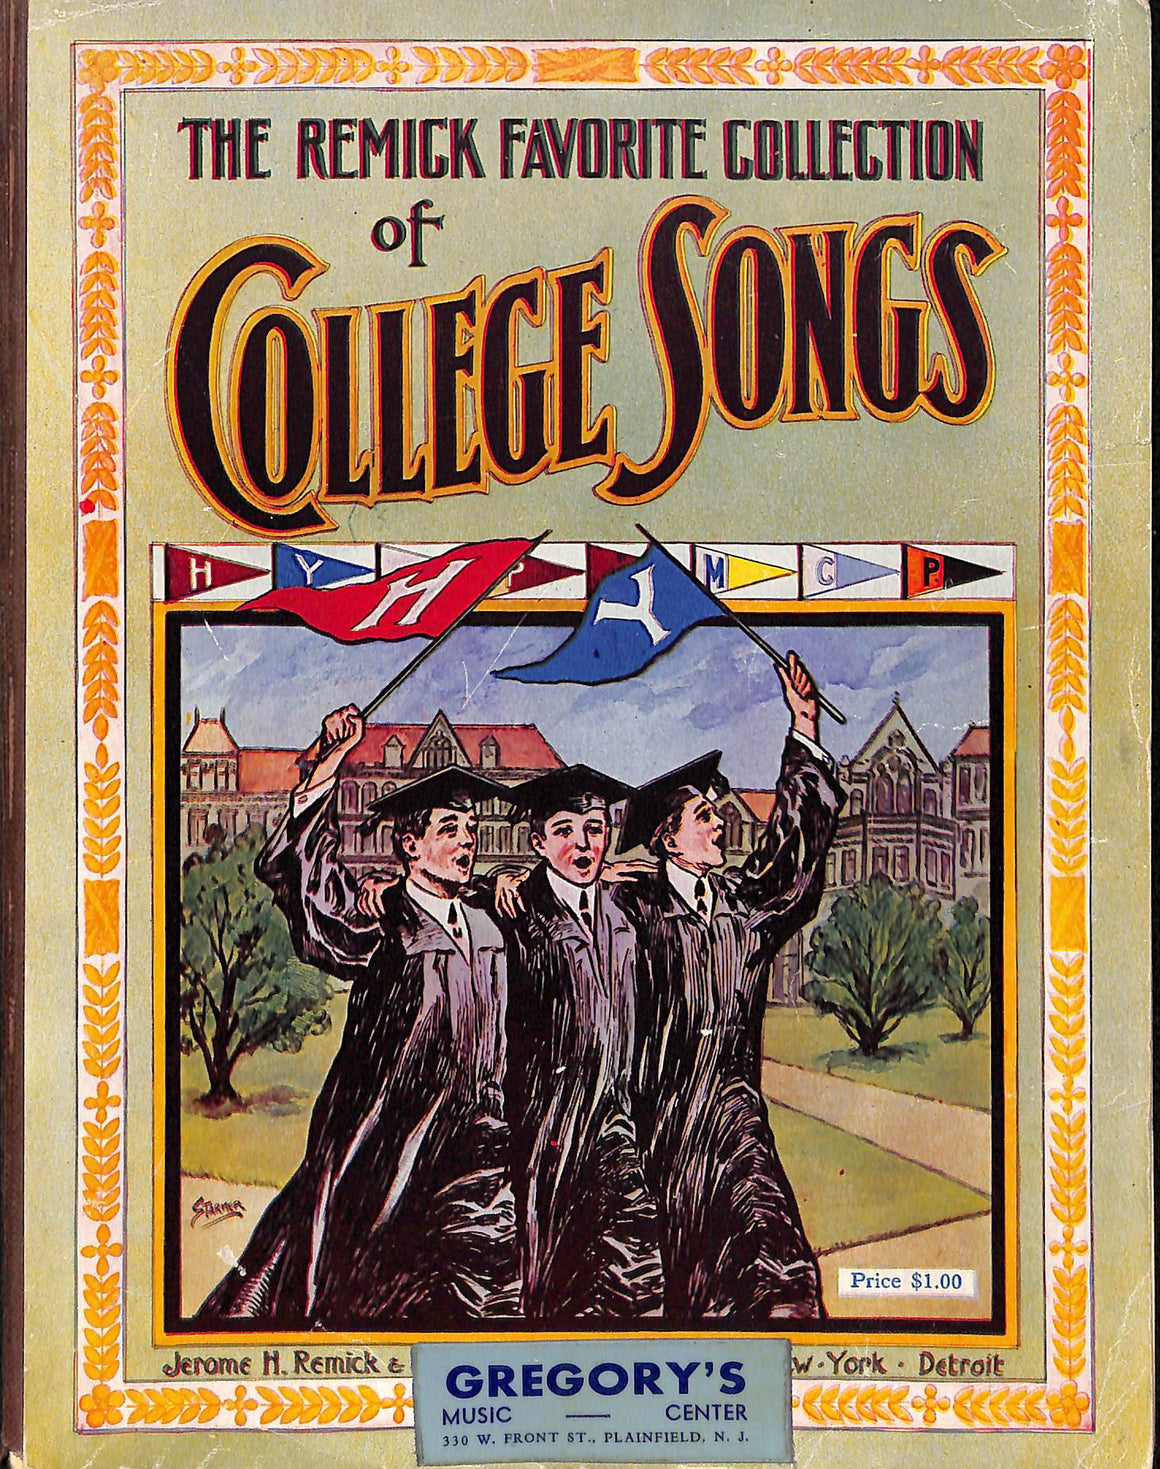 "The Remick Favorite Collection of College Songs" 1909 ROSEY, George